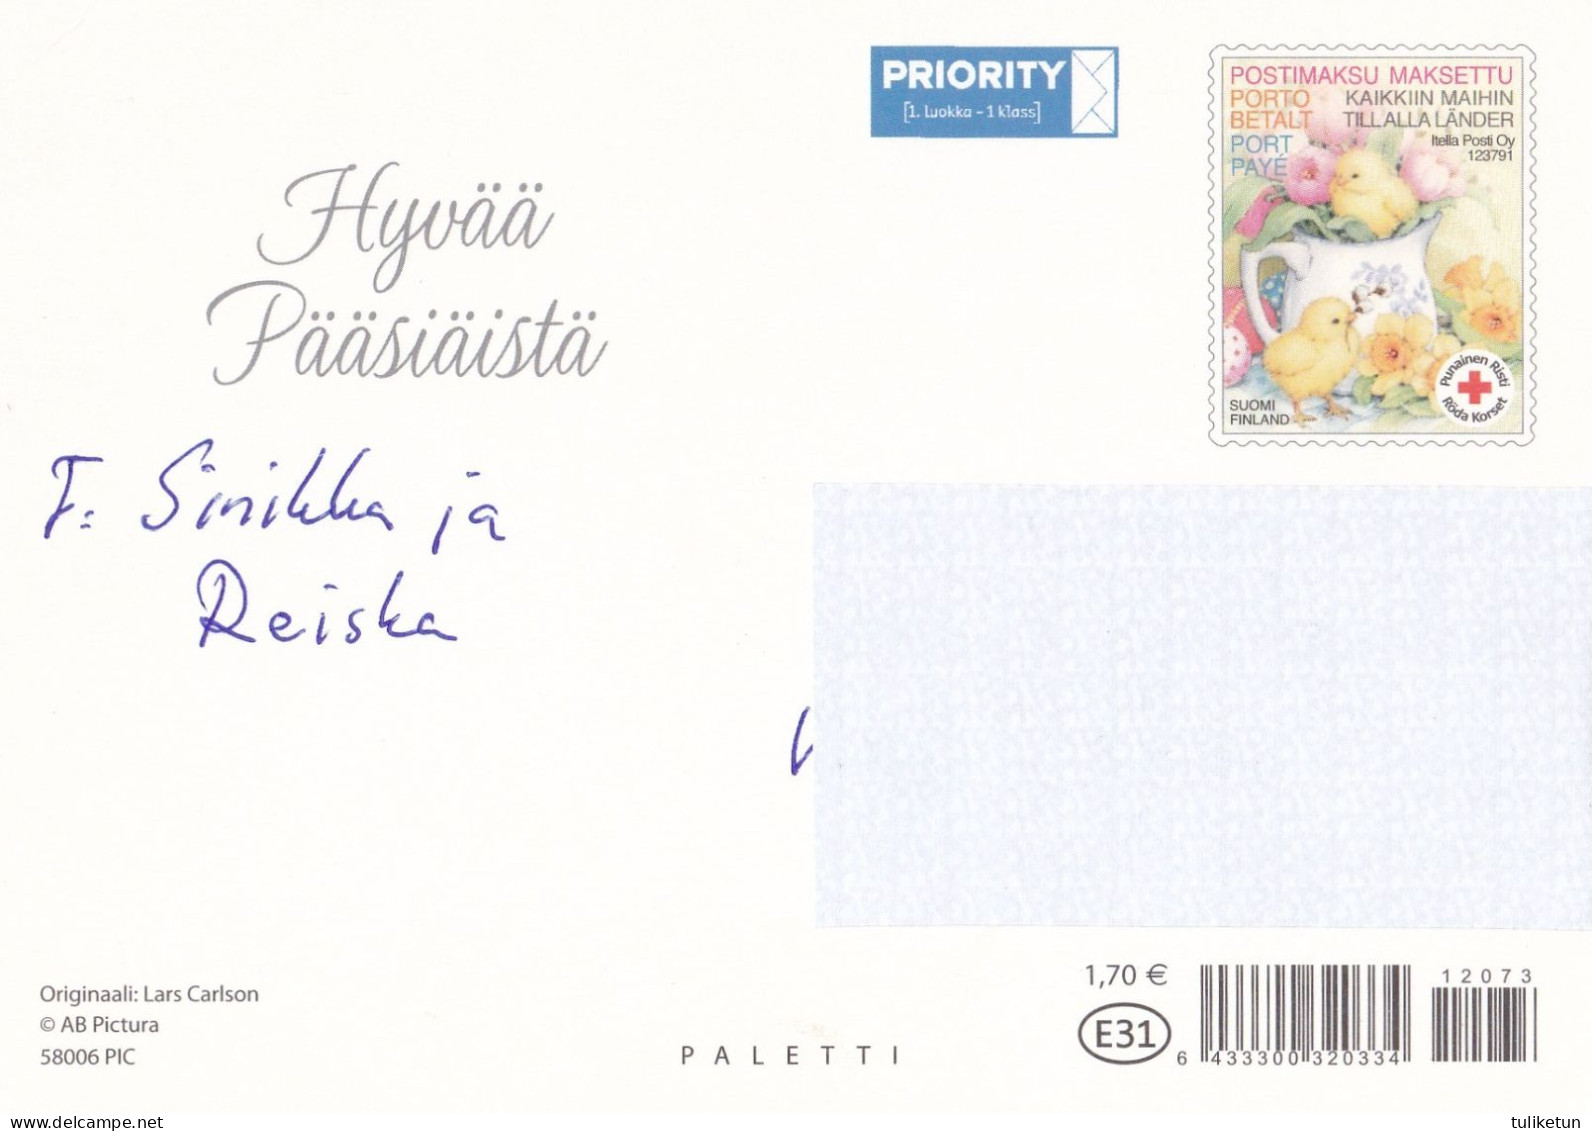 Postal Stationery - Chicks With Egg - Happy Easter - Red Cross - Suomi Finland - Postage Paid - Lars Carlsson - Interi Postali